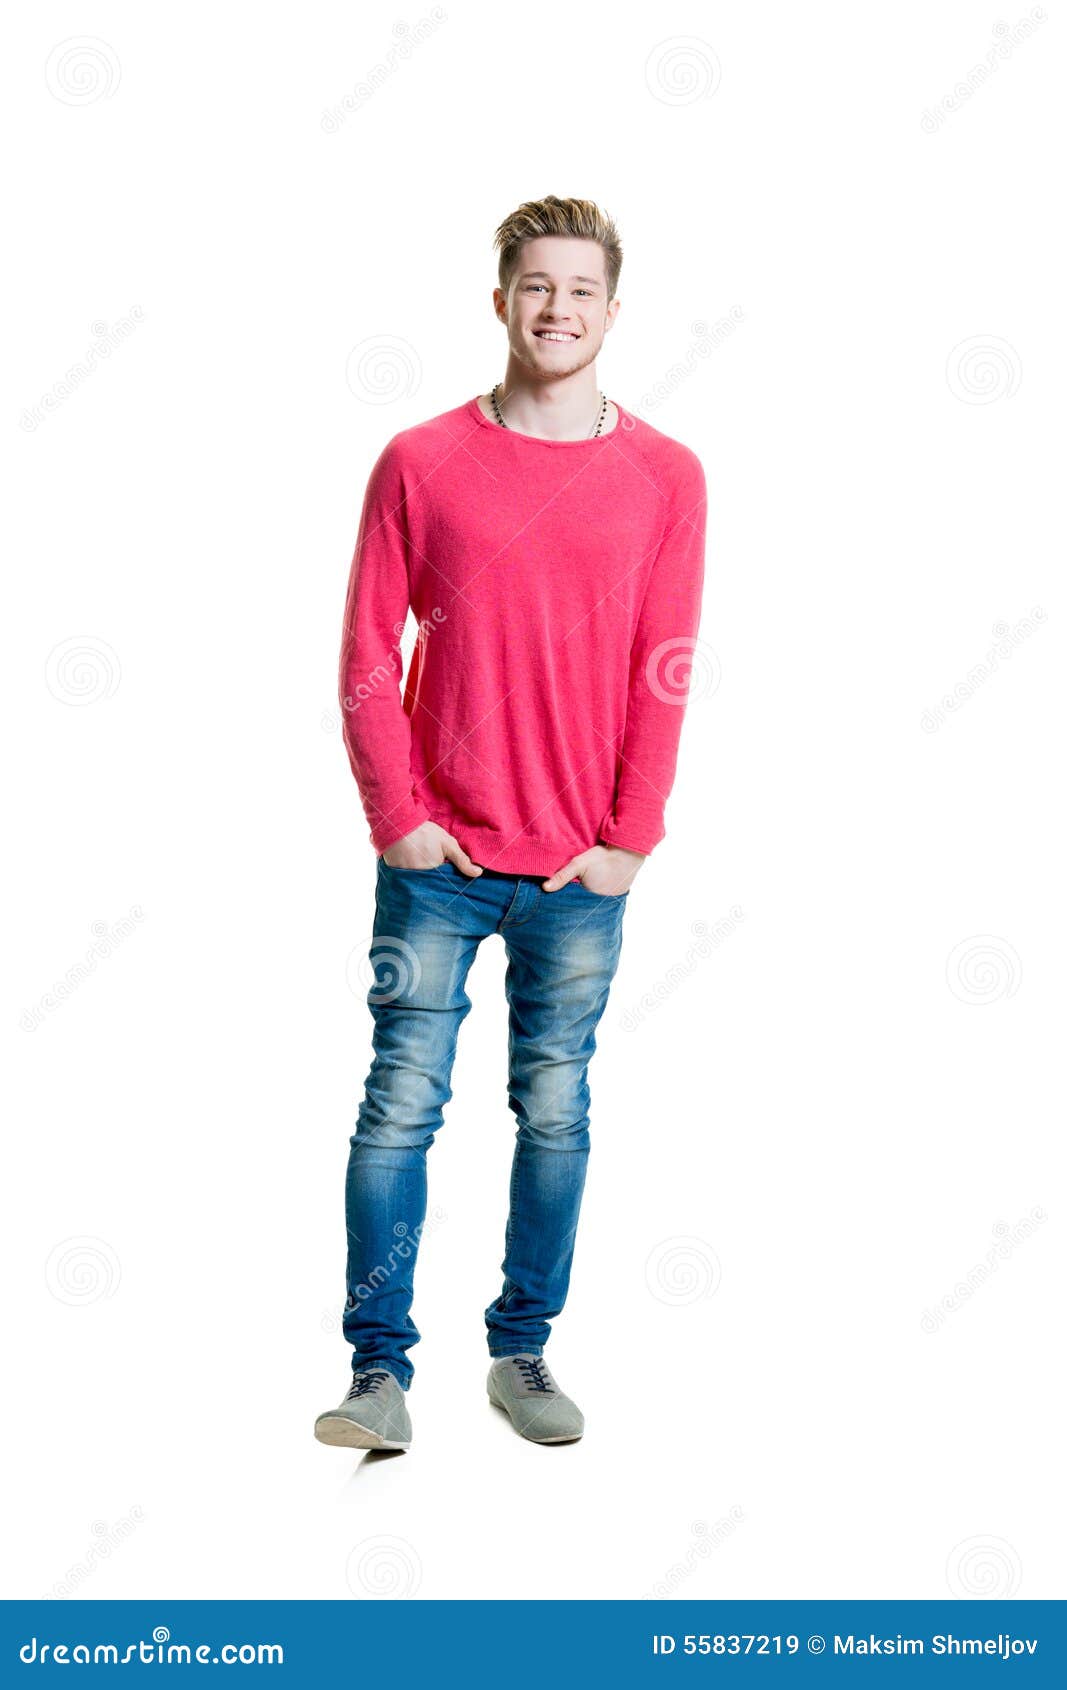 Teenage Boy in a Pink Shirt and Jeans Stock Image - Image of school ...